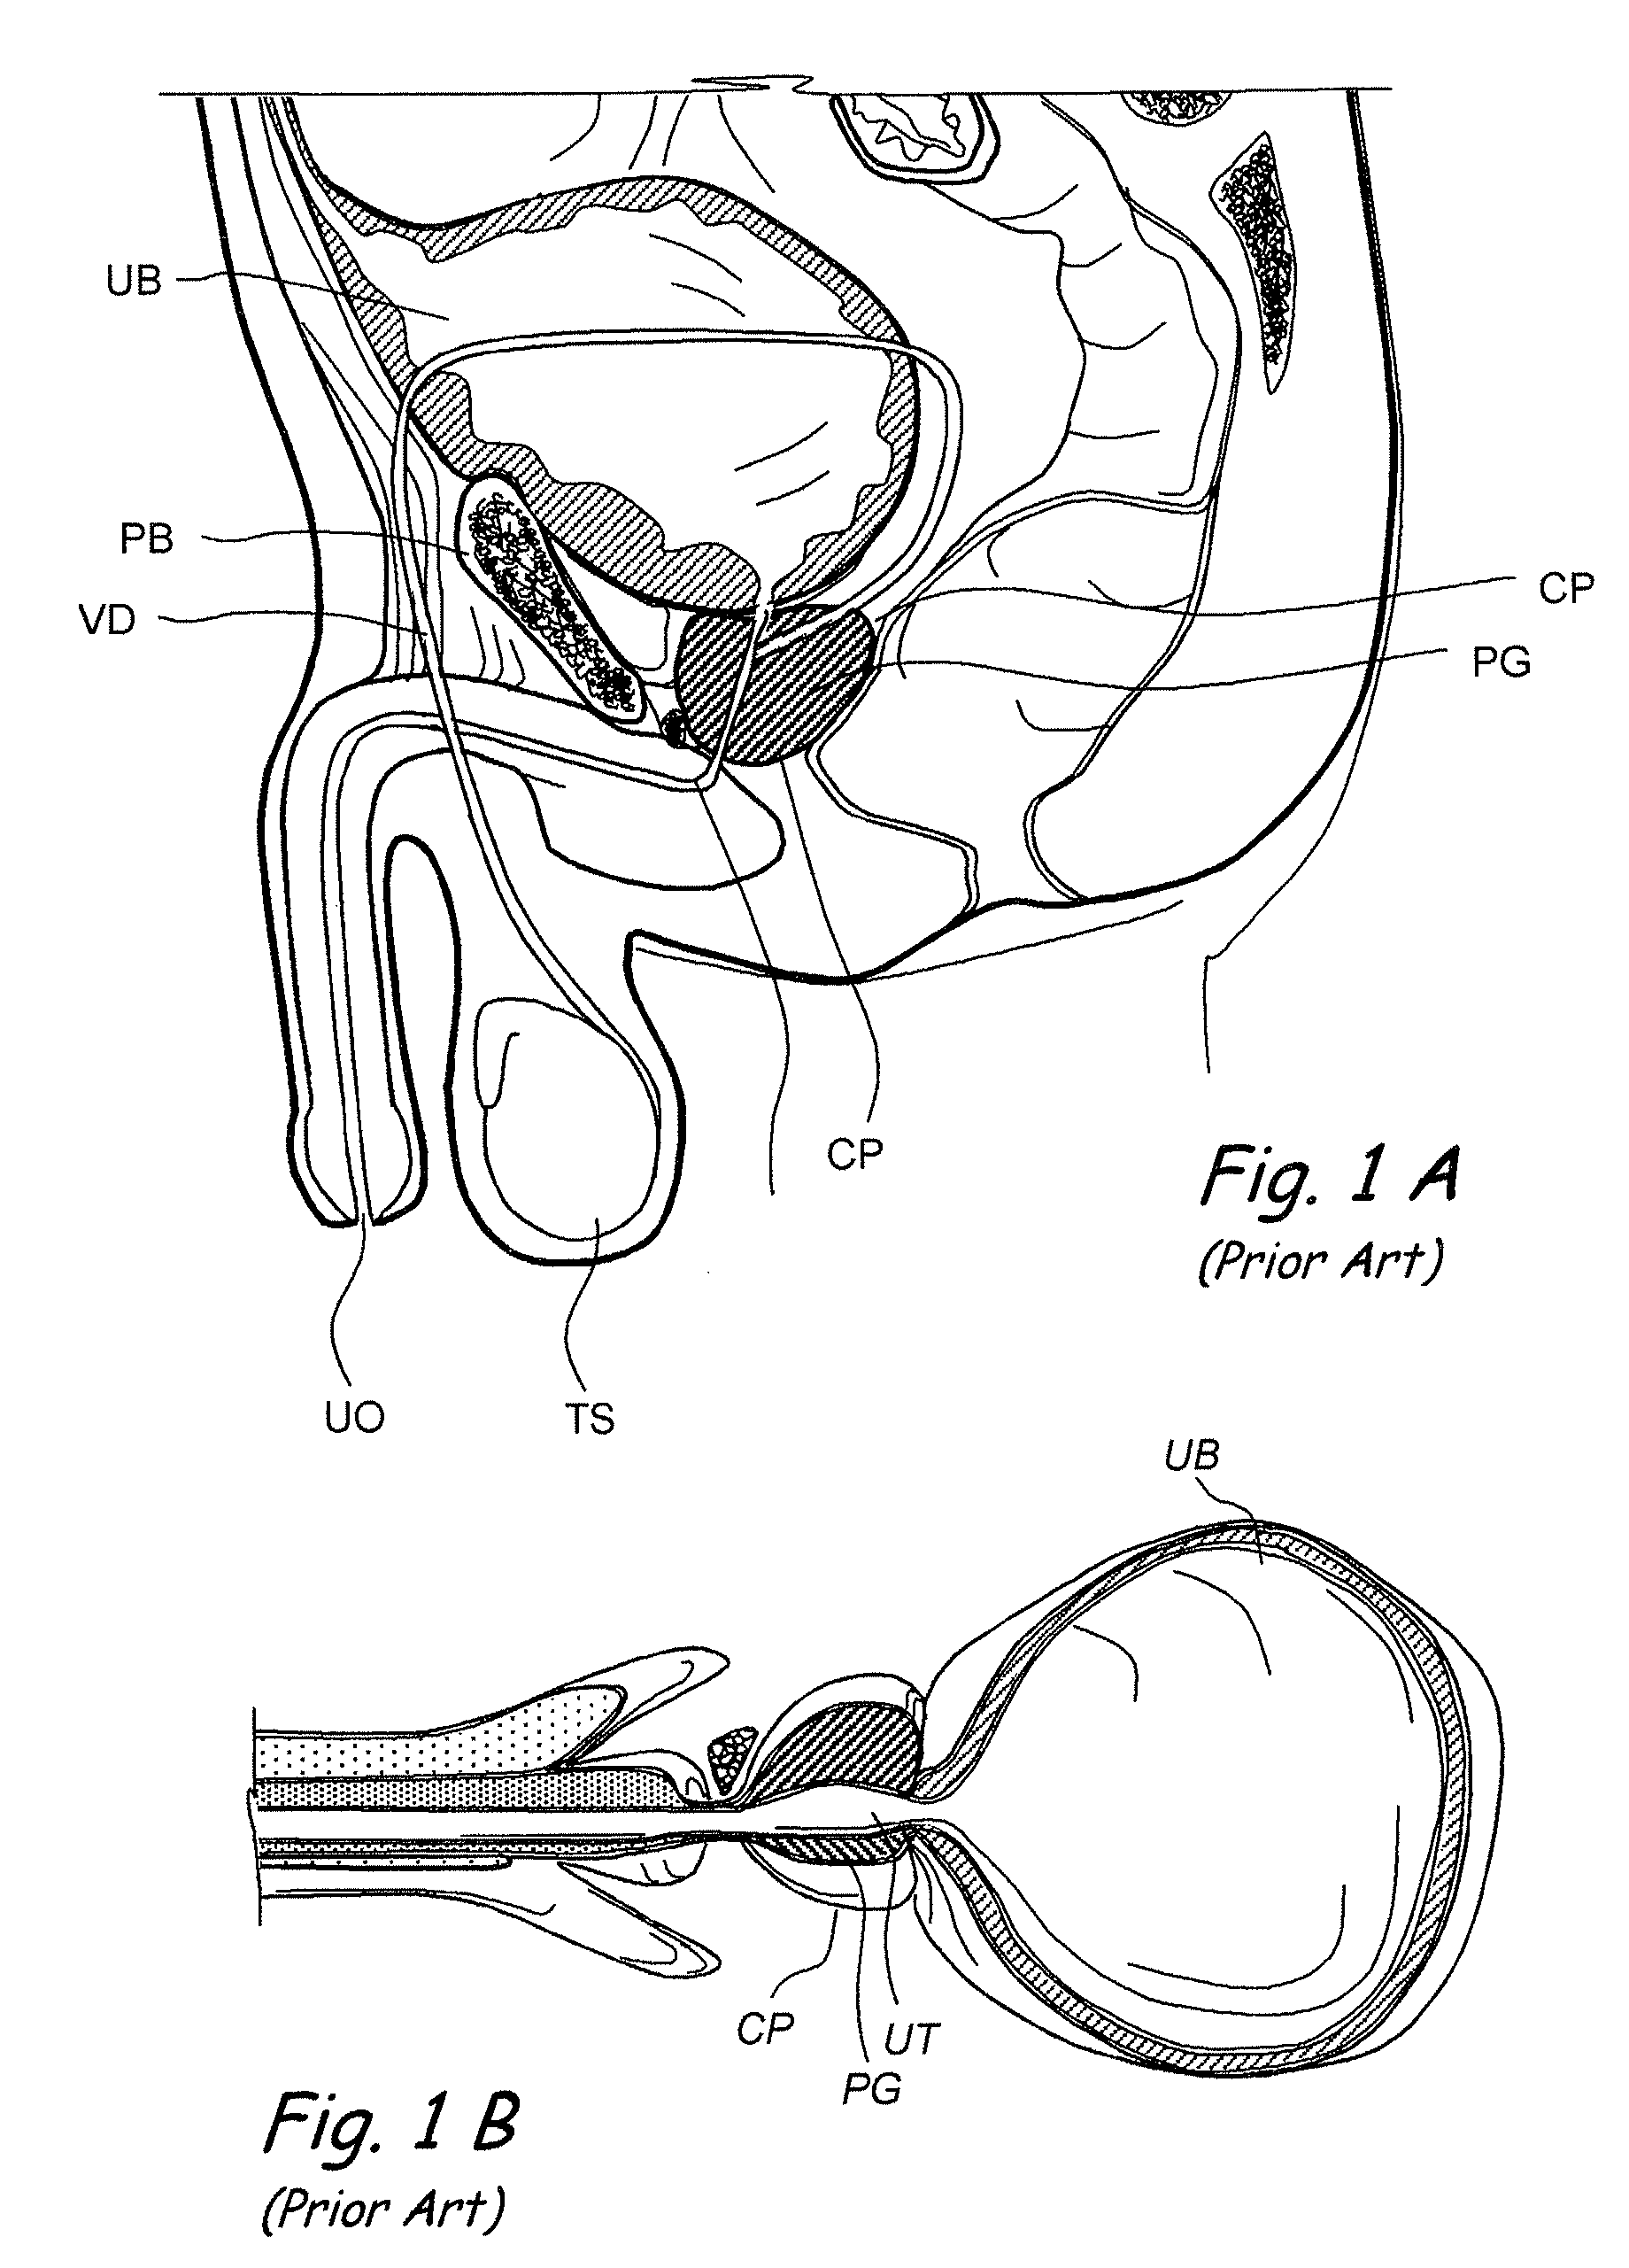 Devices, systems and methods for treating benign prostatic hyperplasia and other conditions